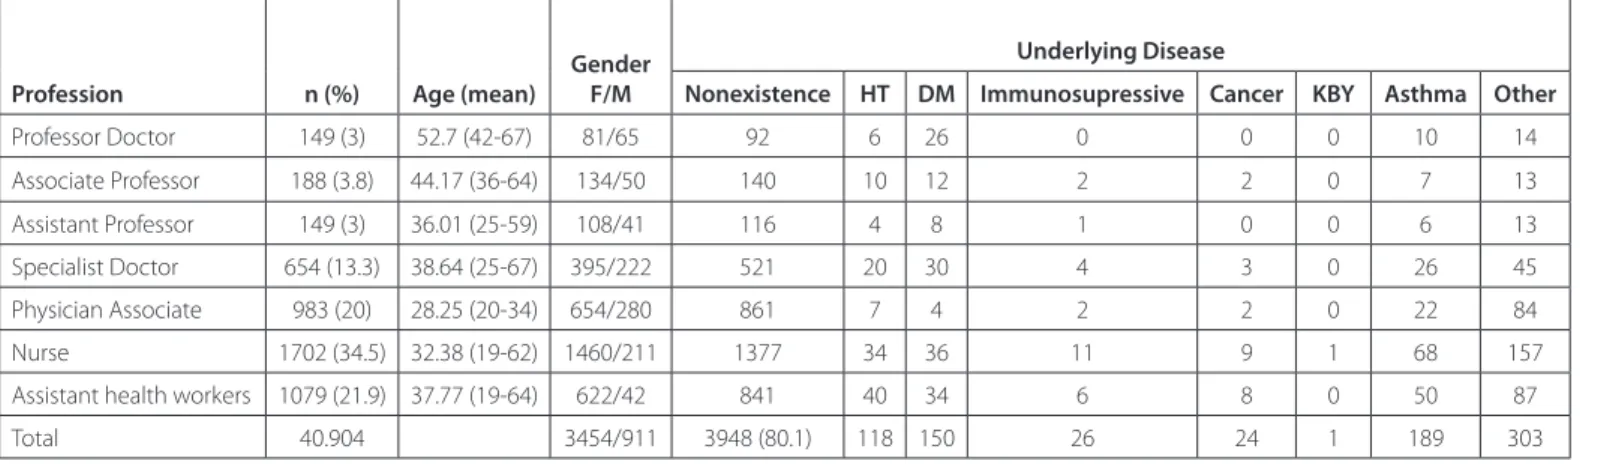 Table 2. Presence and distribution of an underlying disease of the participants